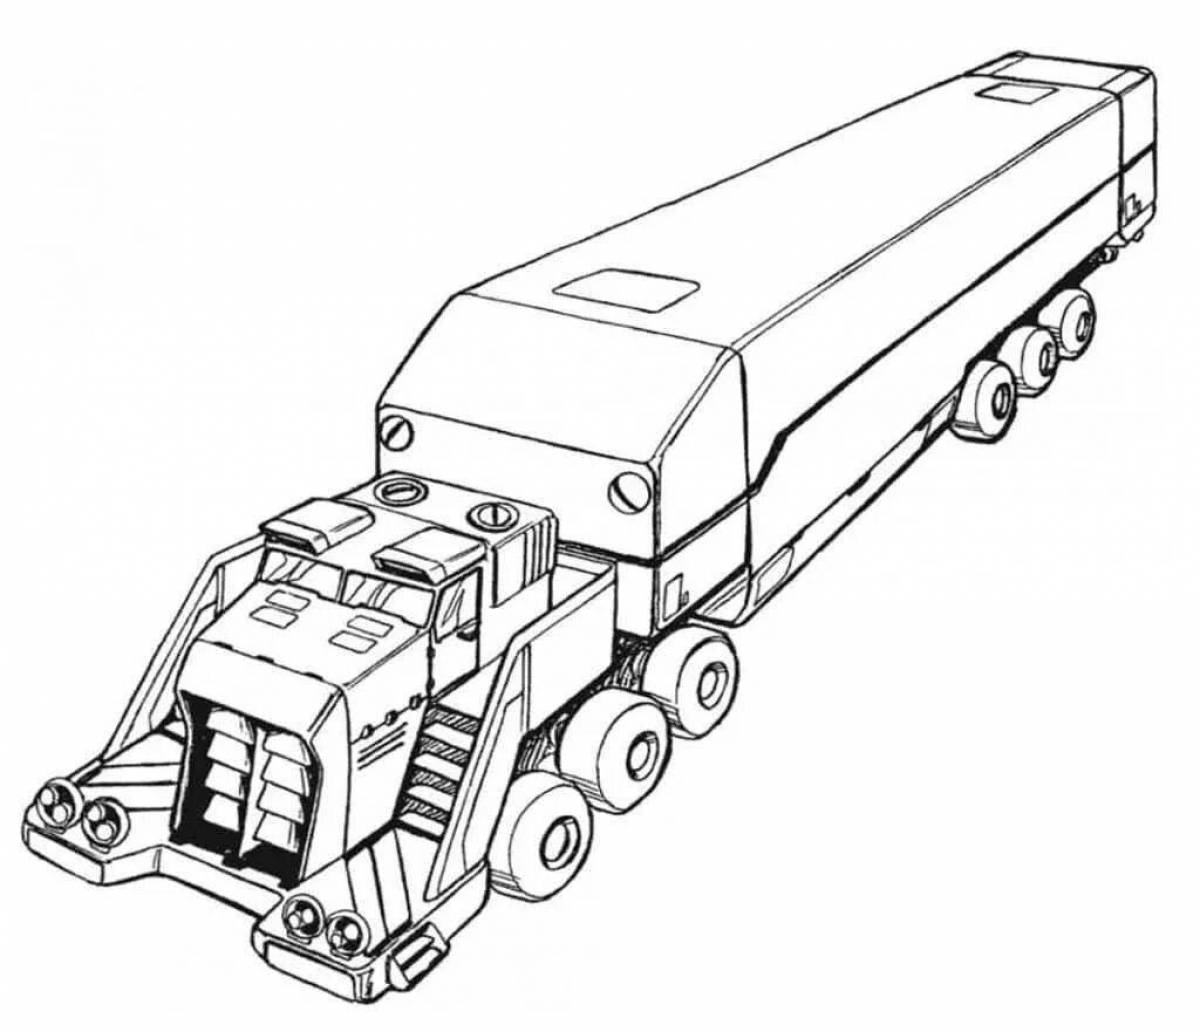 Great military truck coloring book for kids